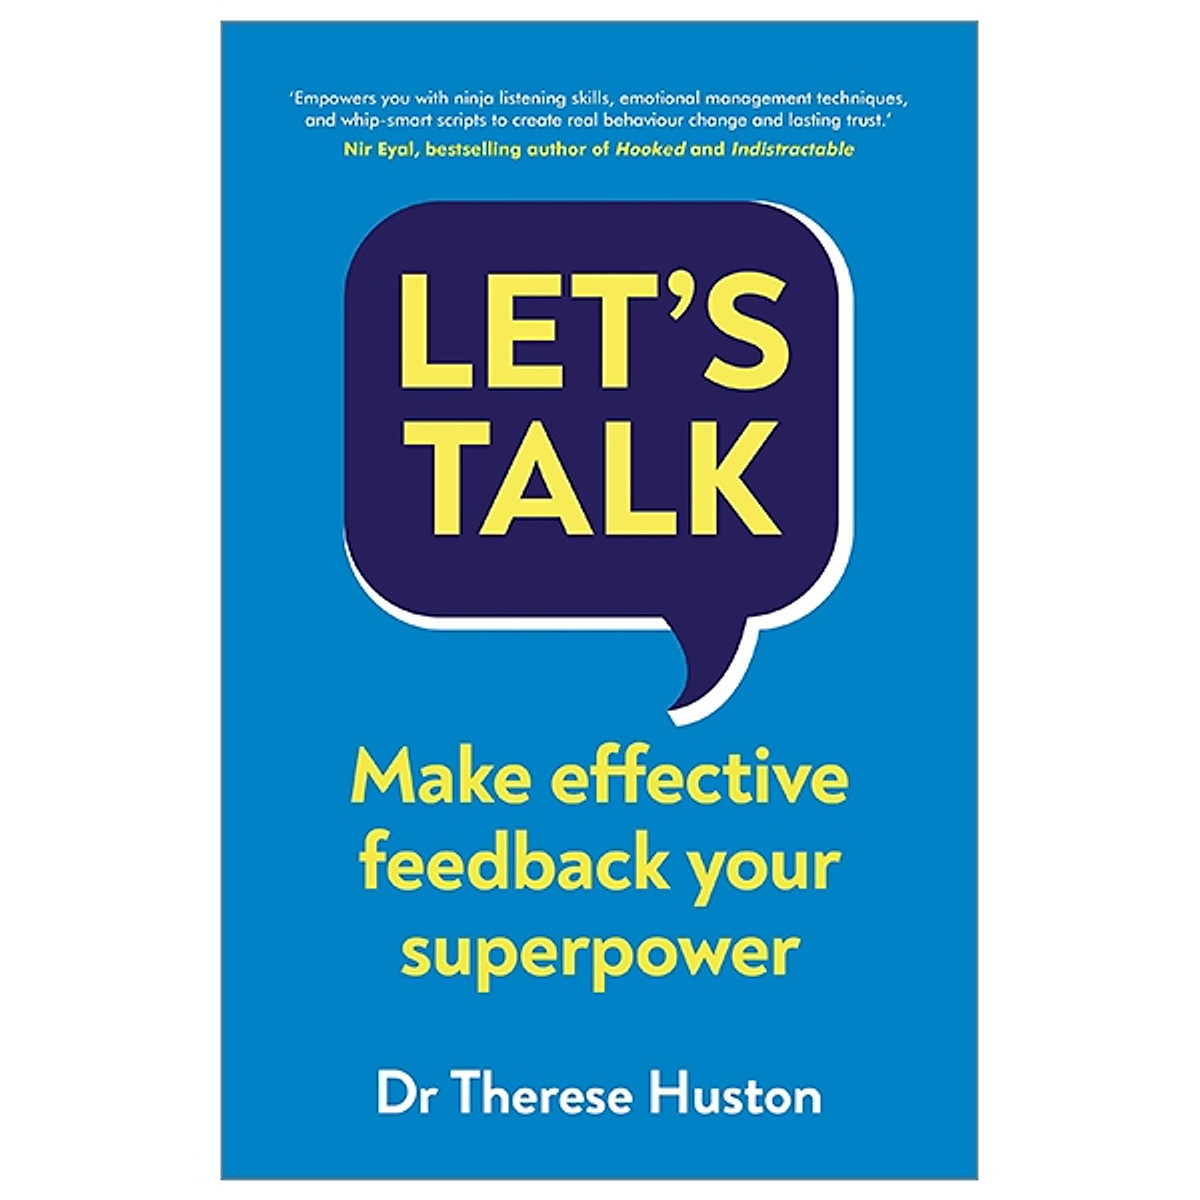 Let’s Talk: Make Effective Feedback Your Superpower